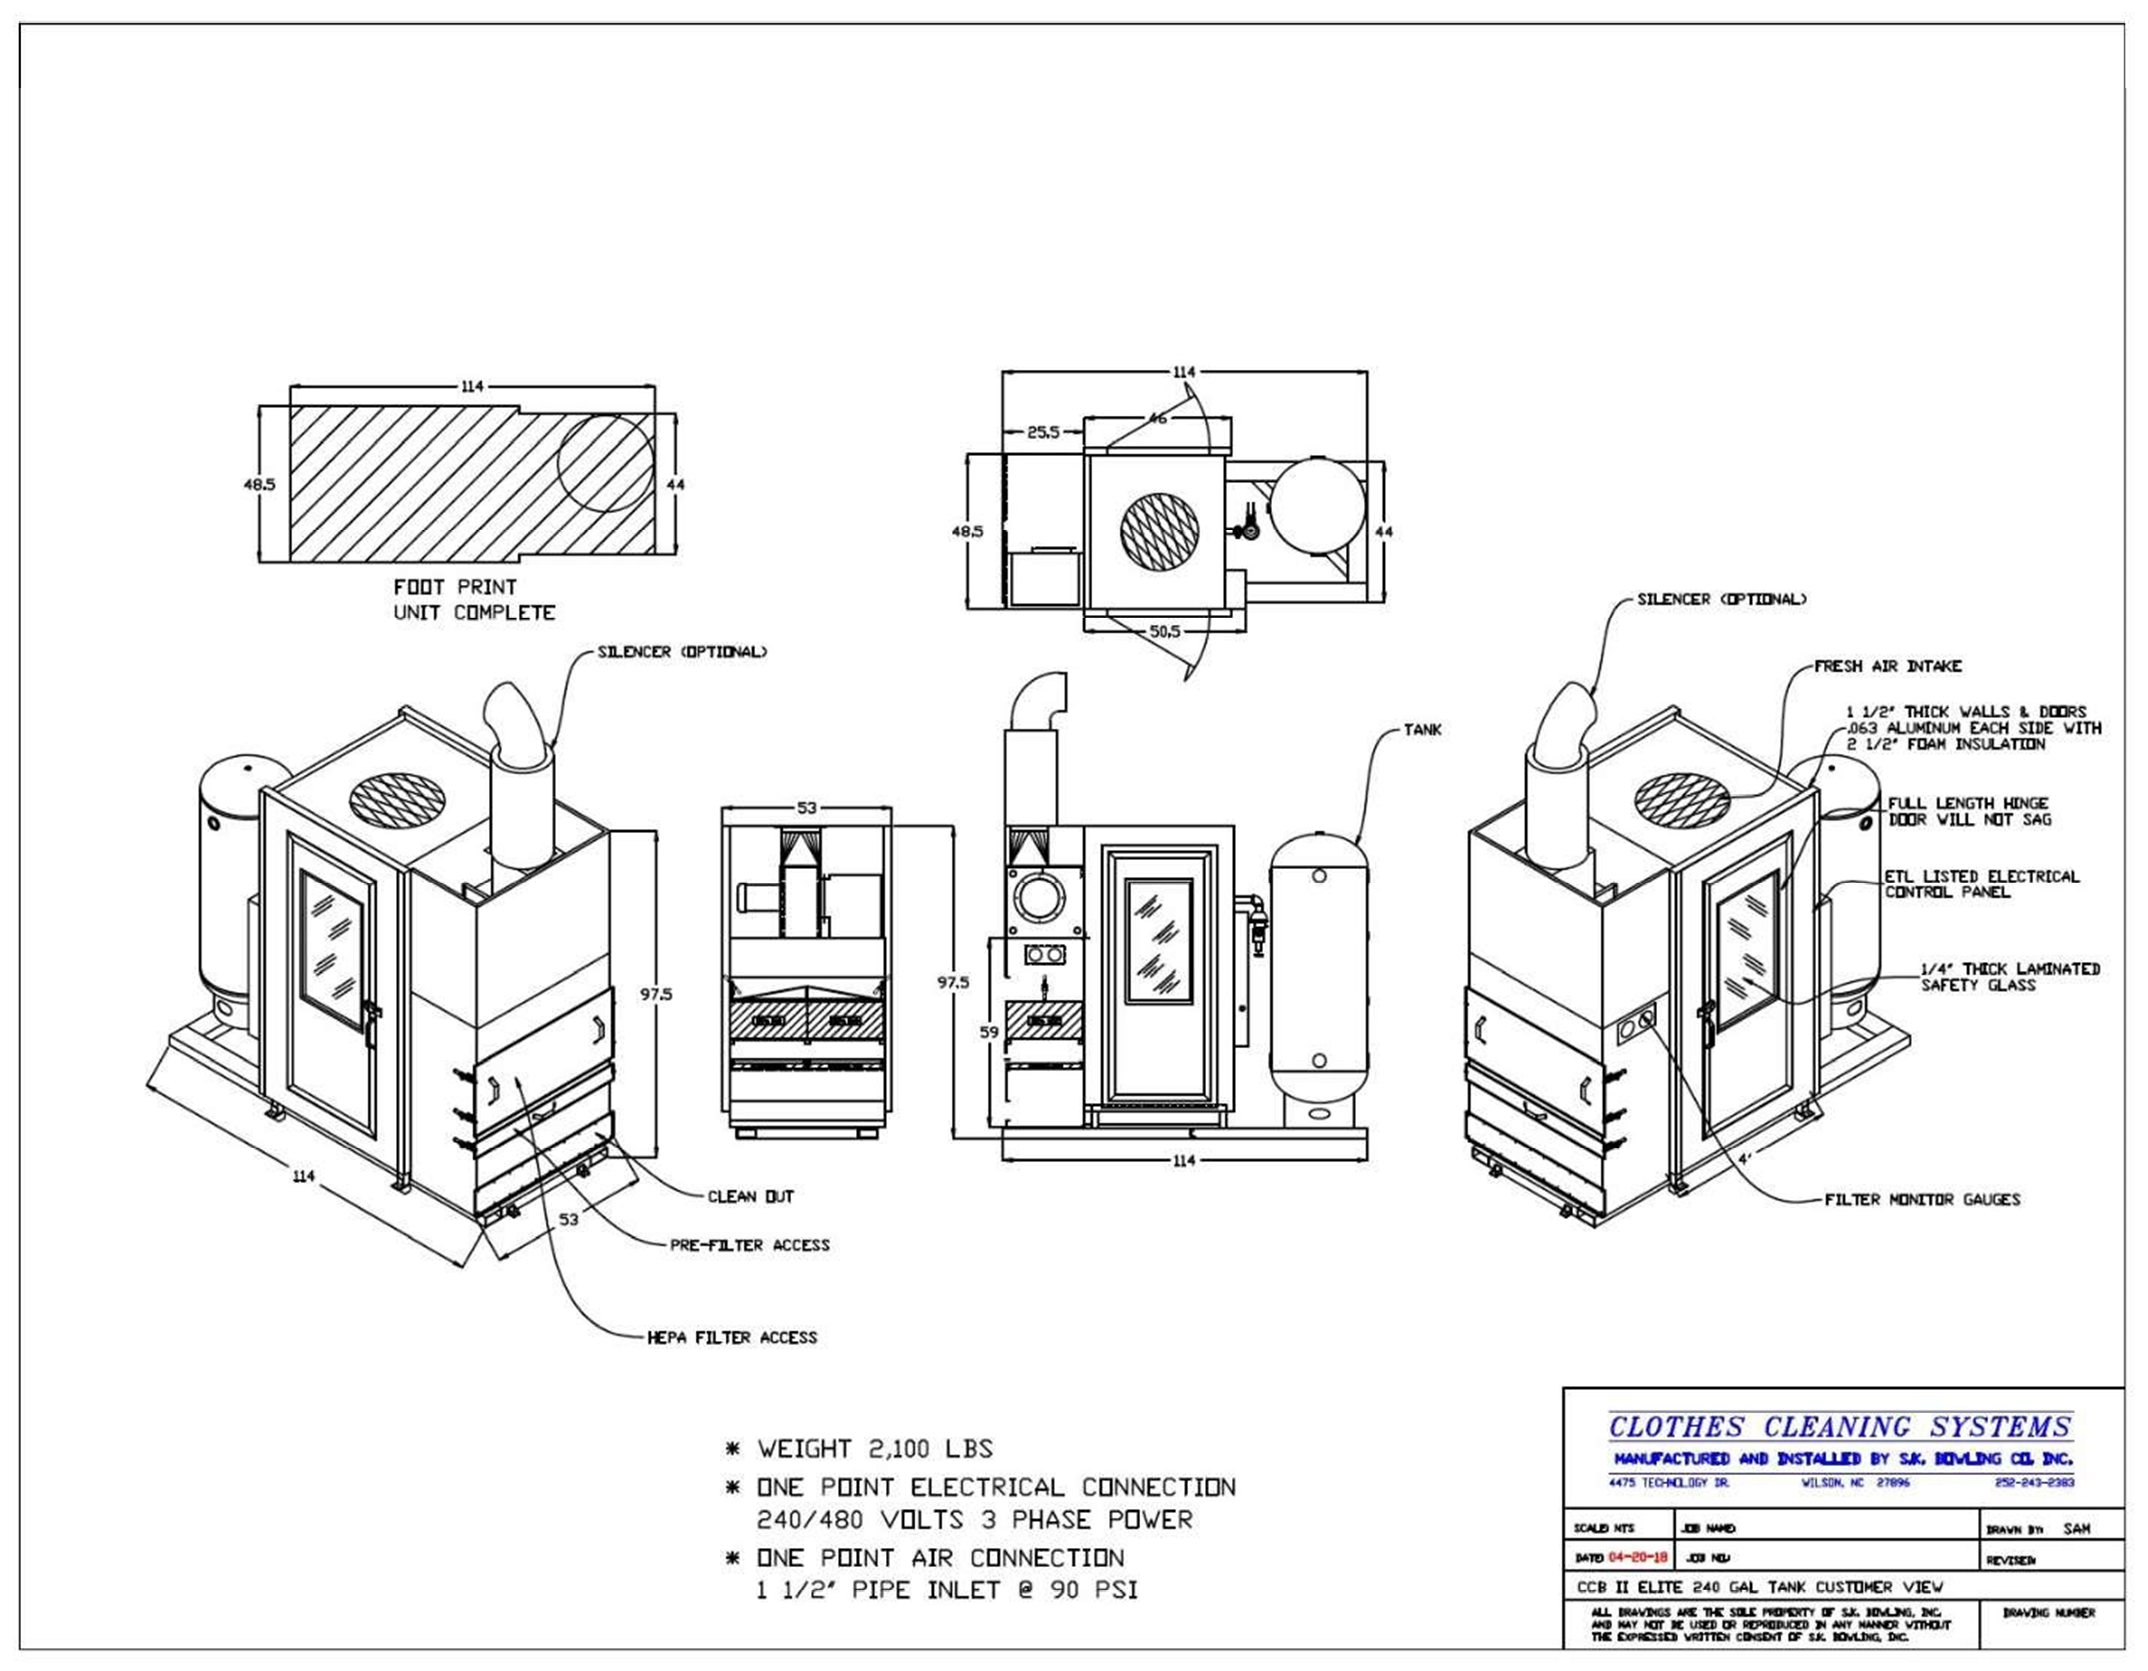 Clothes Cleaning Booth - General Arrangement Drawing